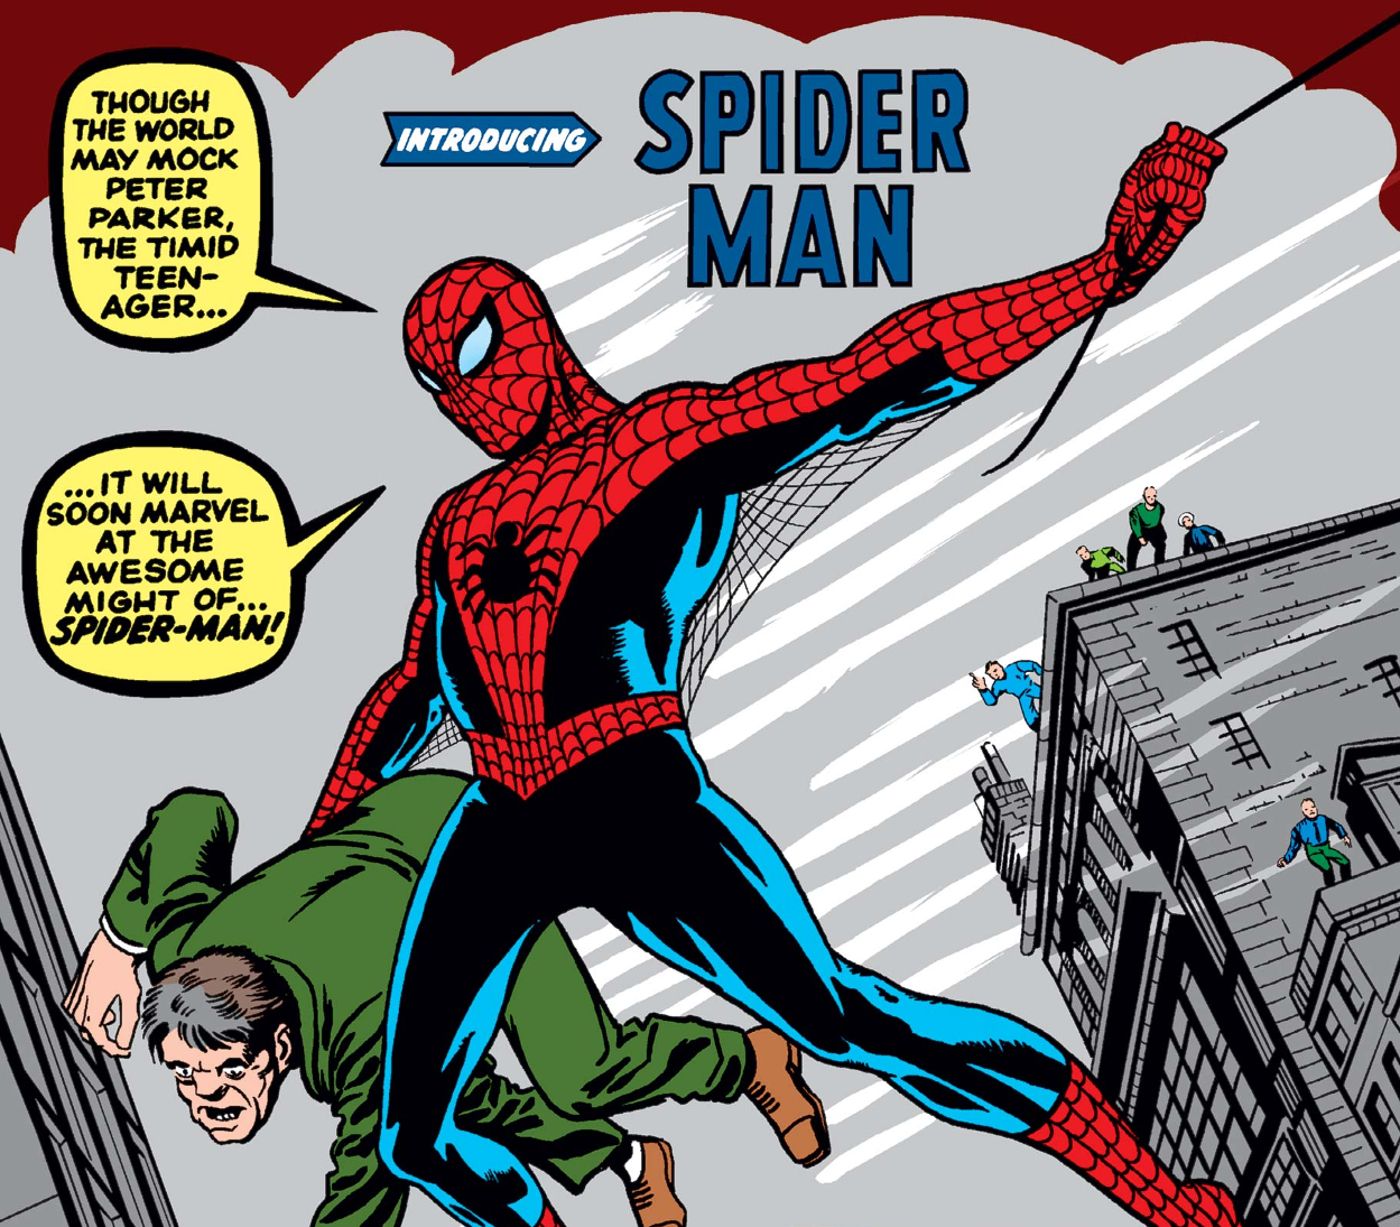 Spider-Man's first introduction in Amazing Fantasy #15